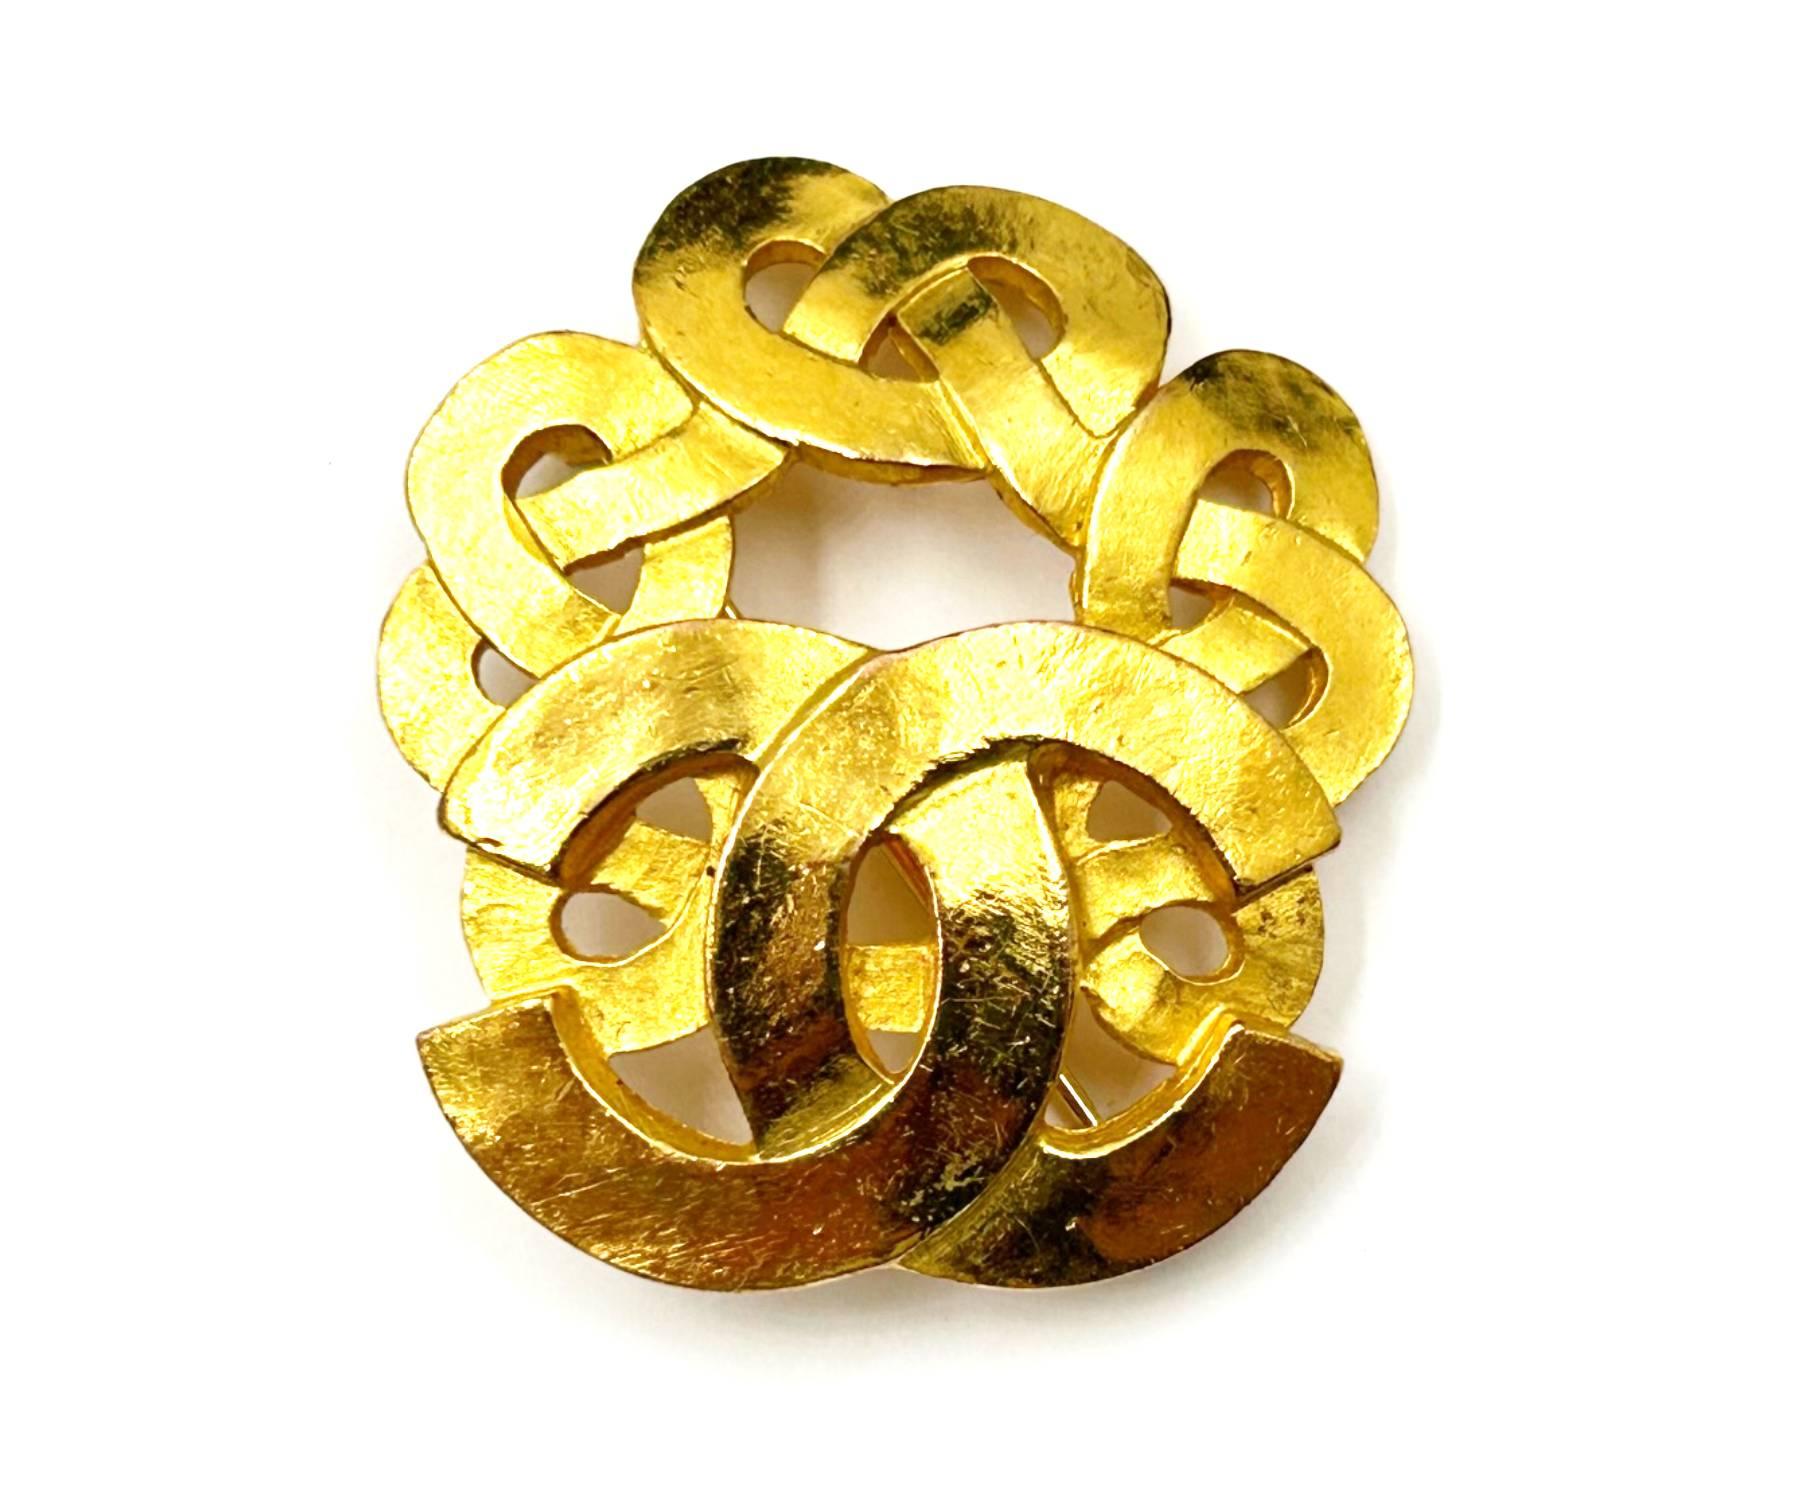 Chanel Vintage Gold Plated CC Twisted Small Brooch

*Marked 97
*Made in France

-It is approximately 1.5